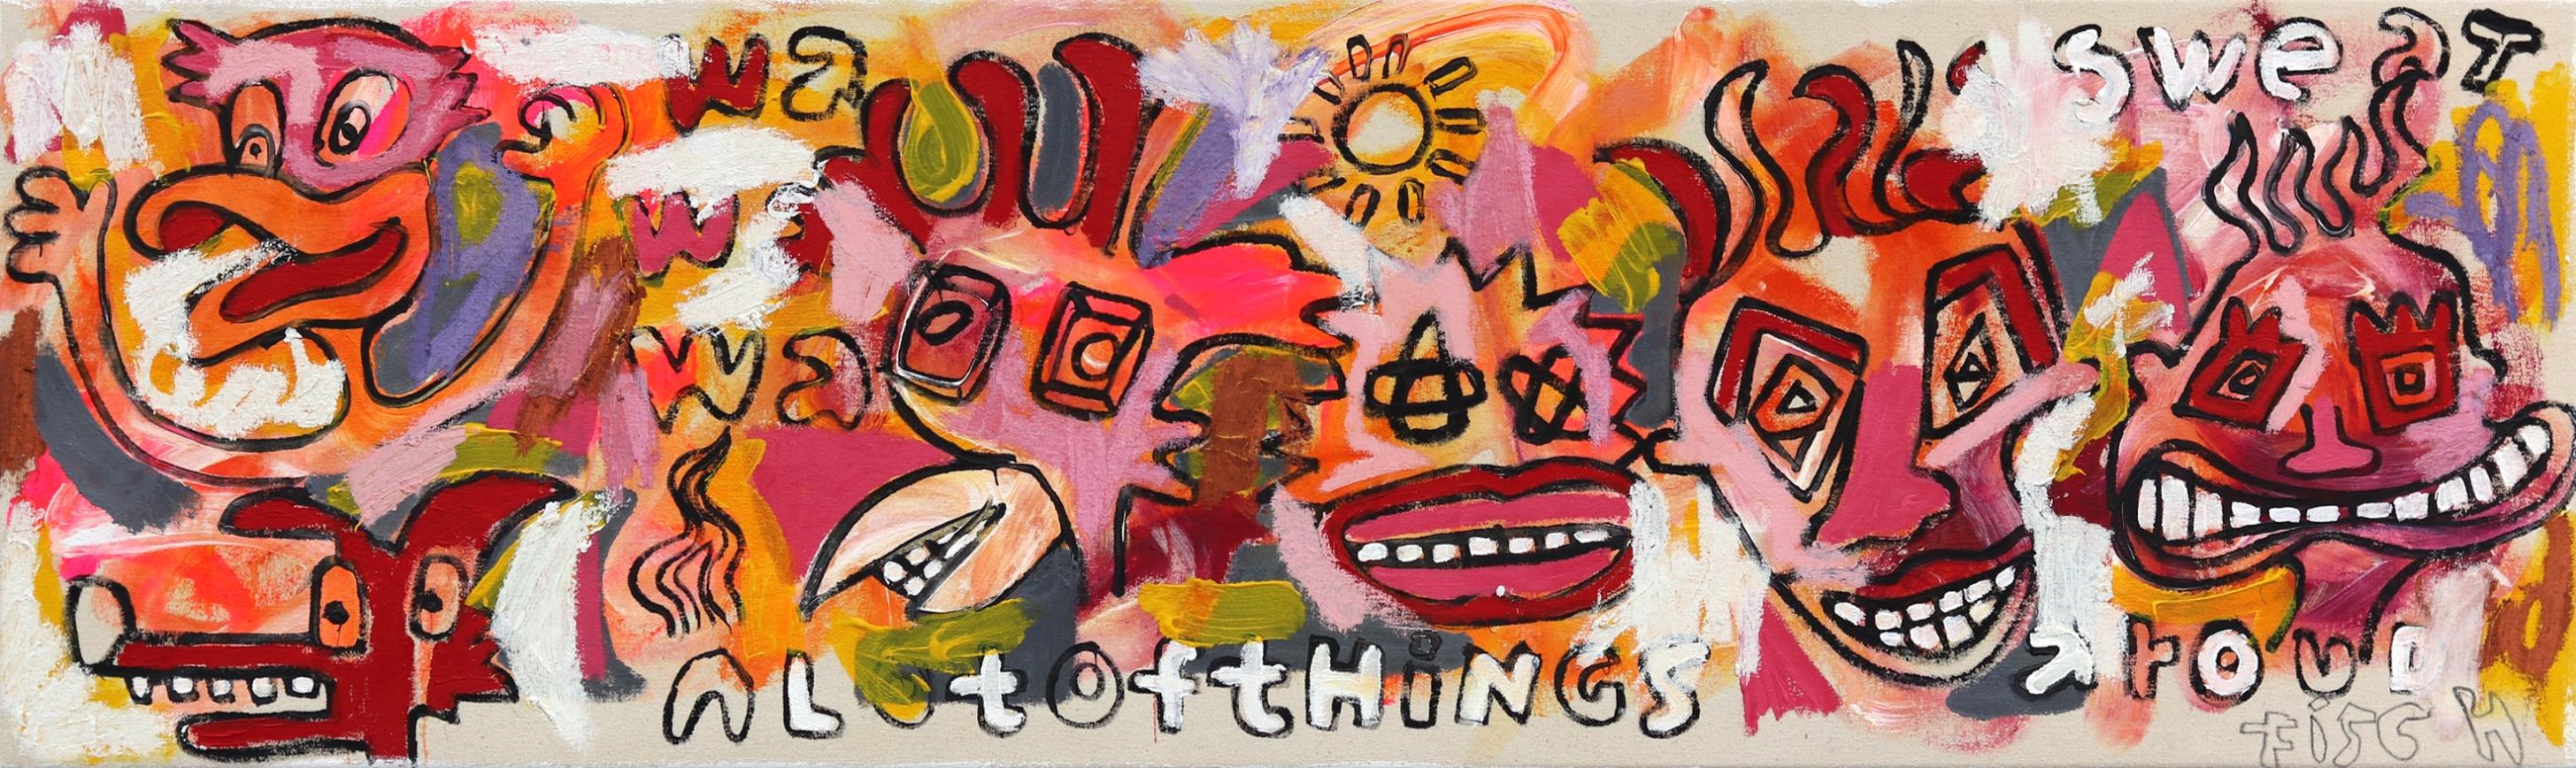 A Lot of Things - Red Abstract Expressionist Street Art Original Painting